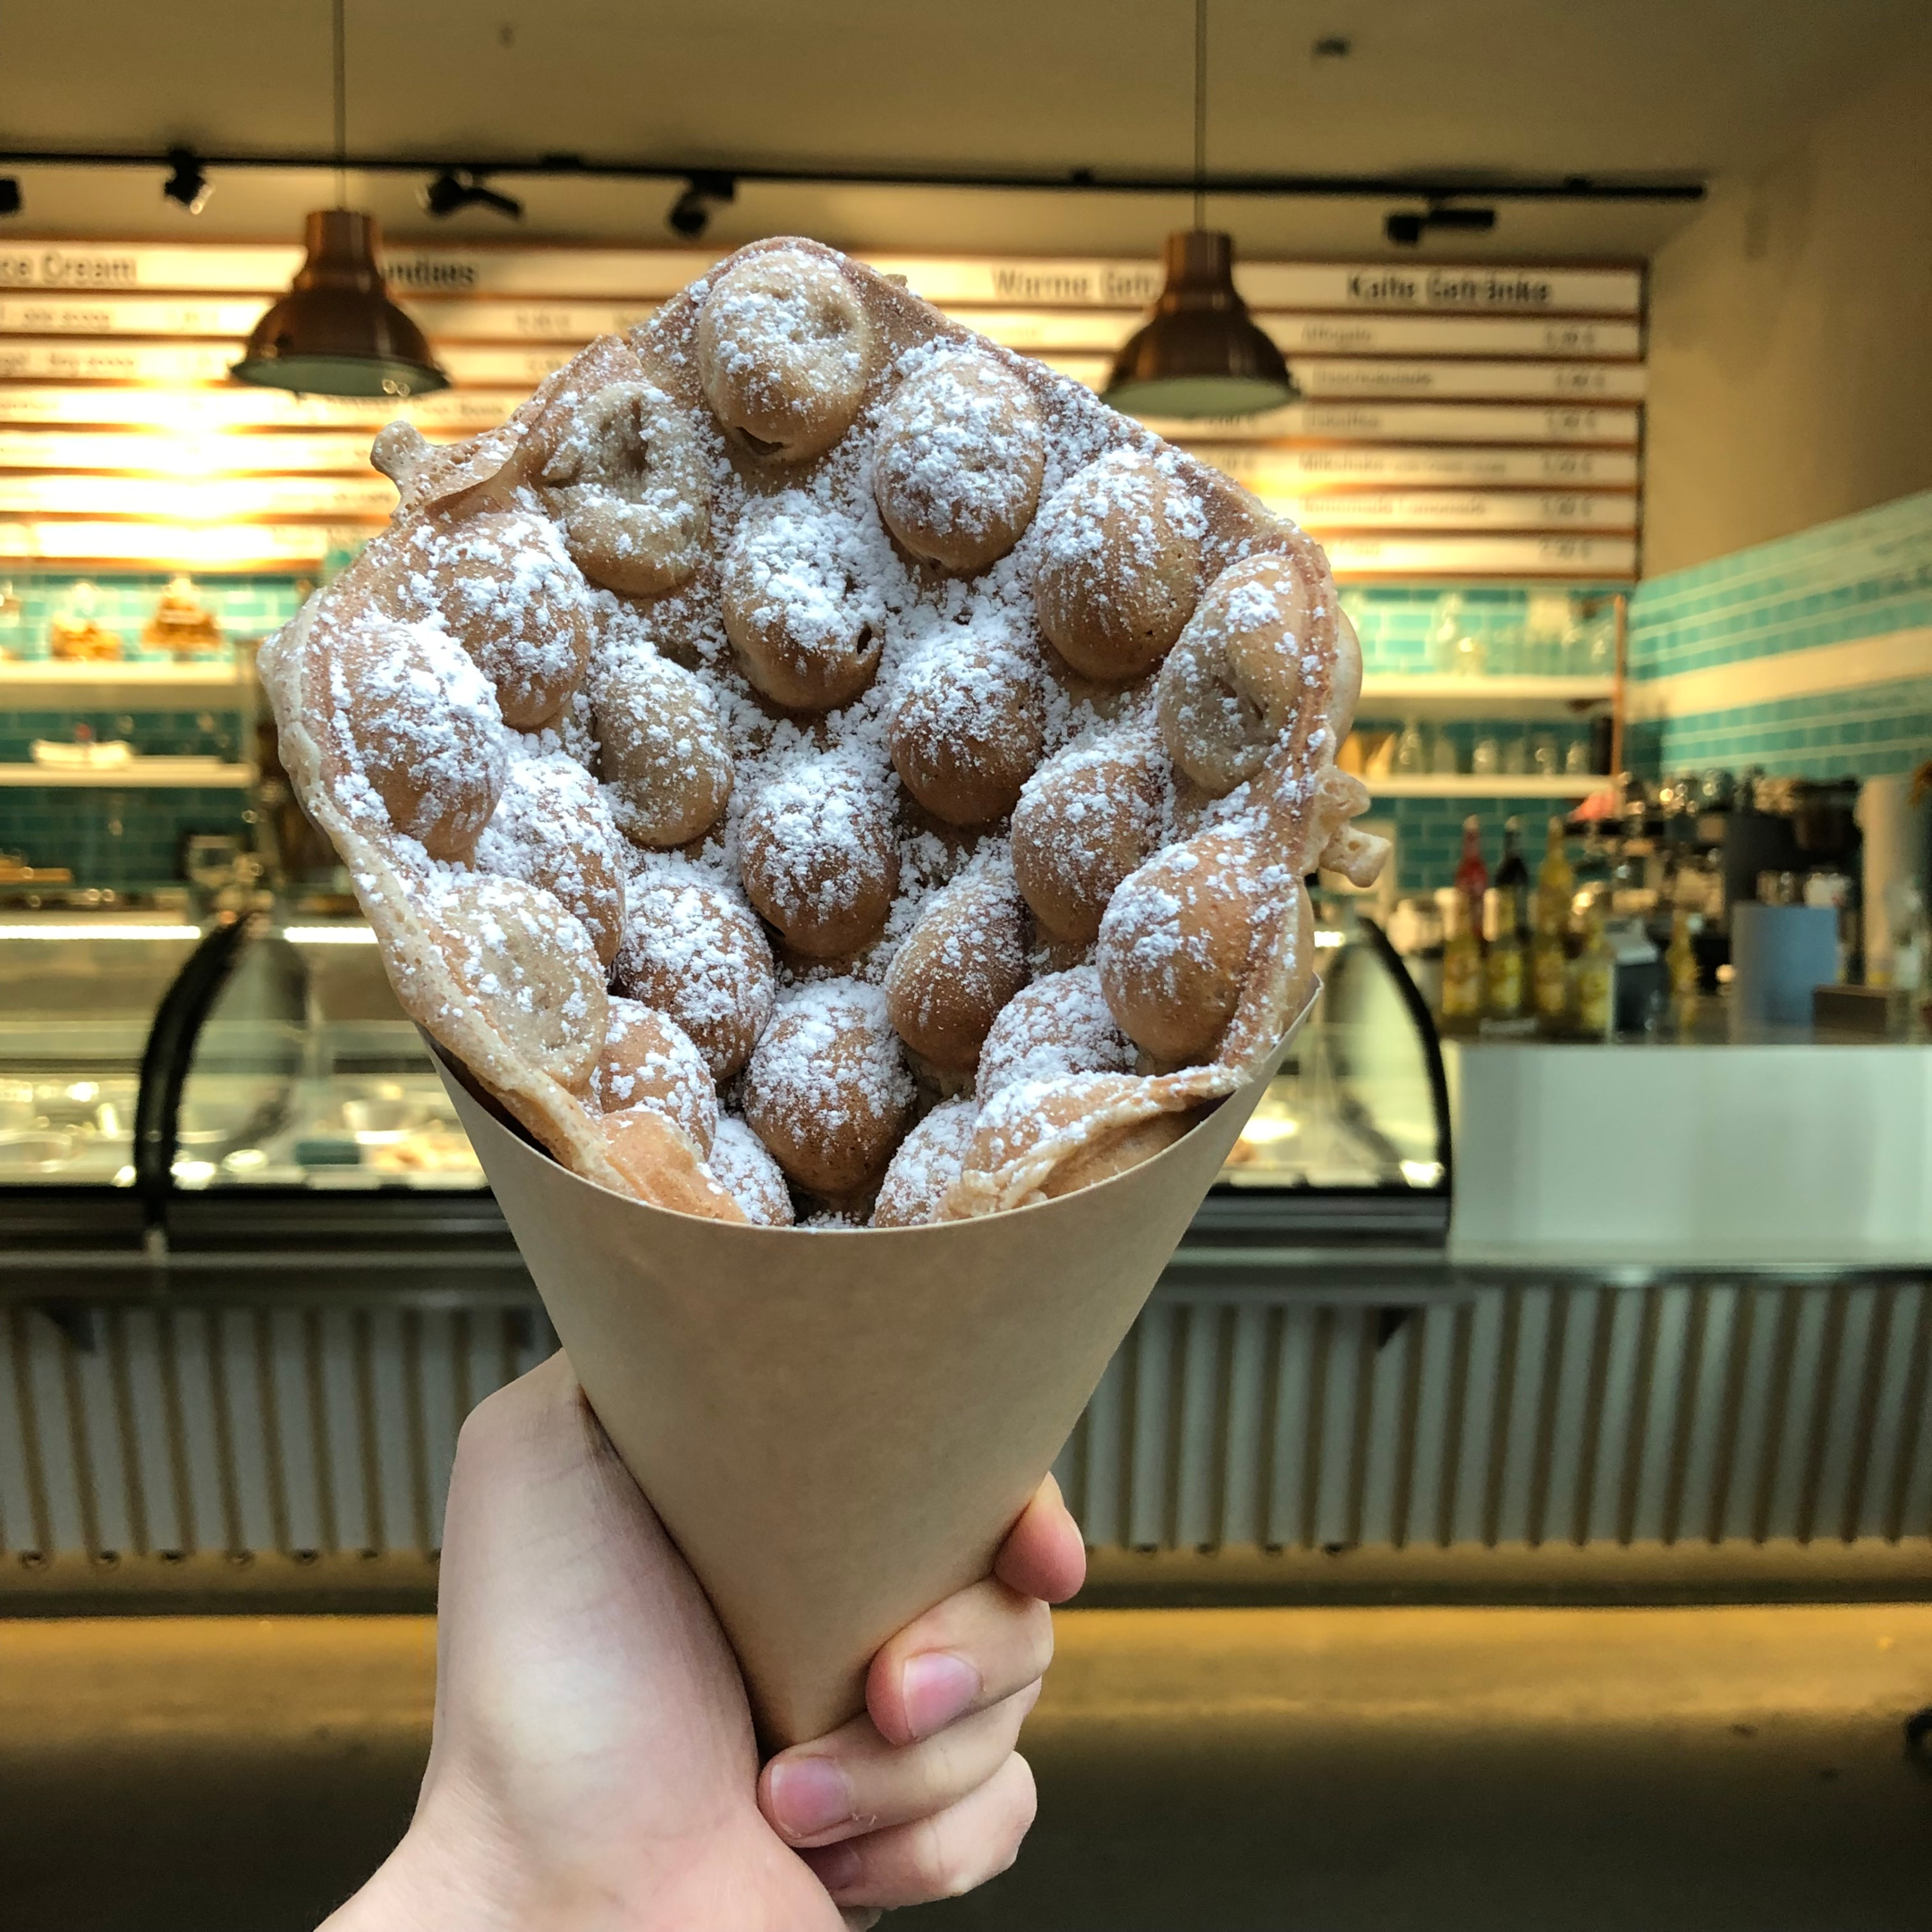 Serving bubble waffles in a cone shape with powdered sugar